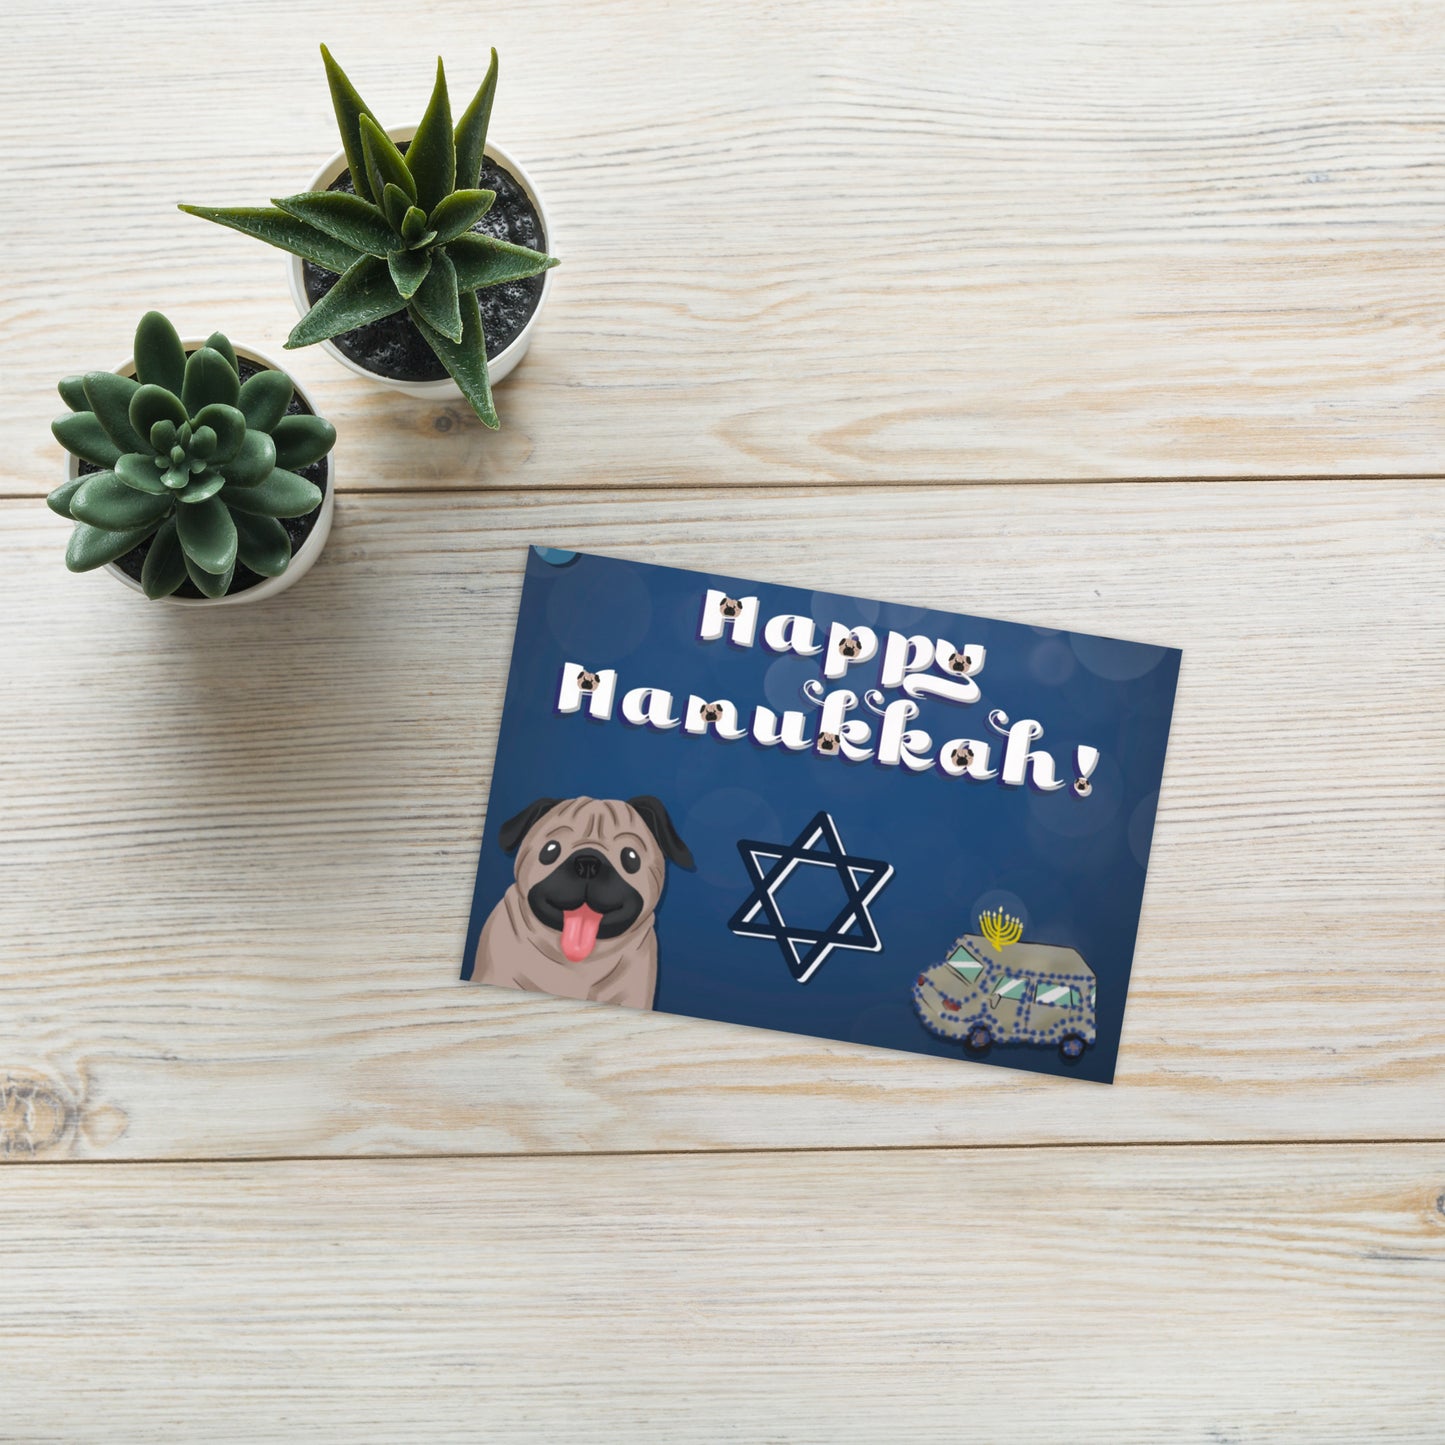 From Spike's Hanukkah Collection - Greeting Card